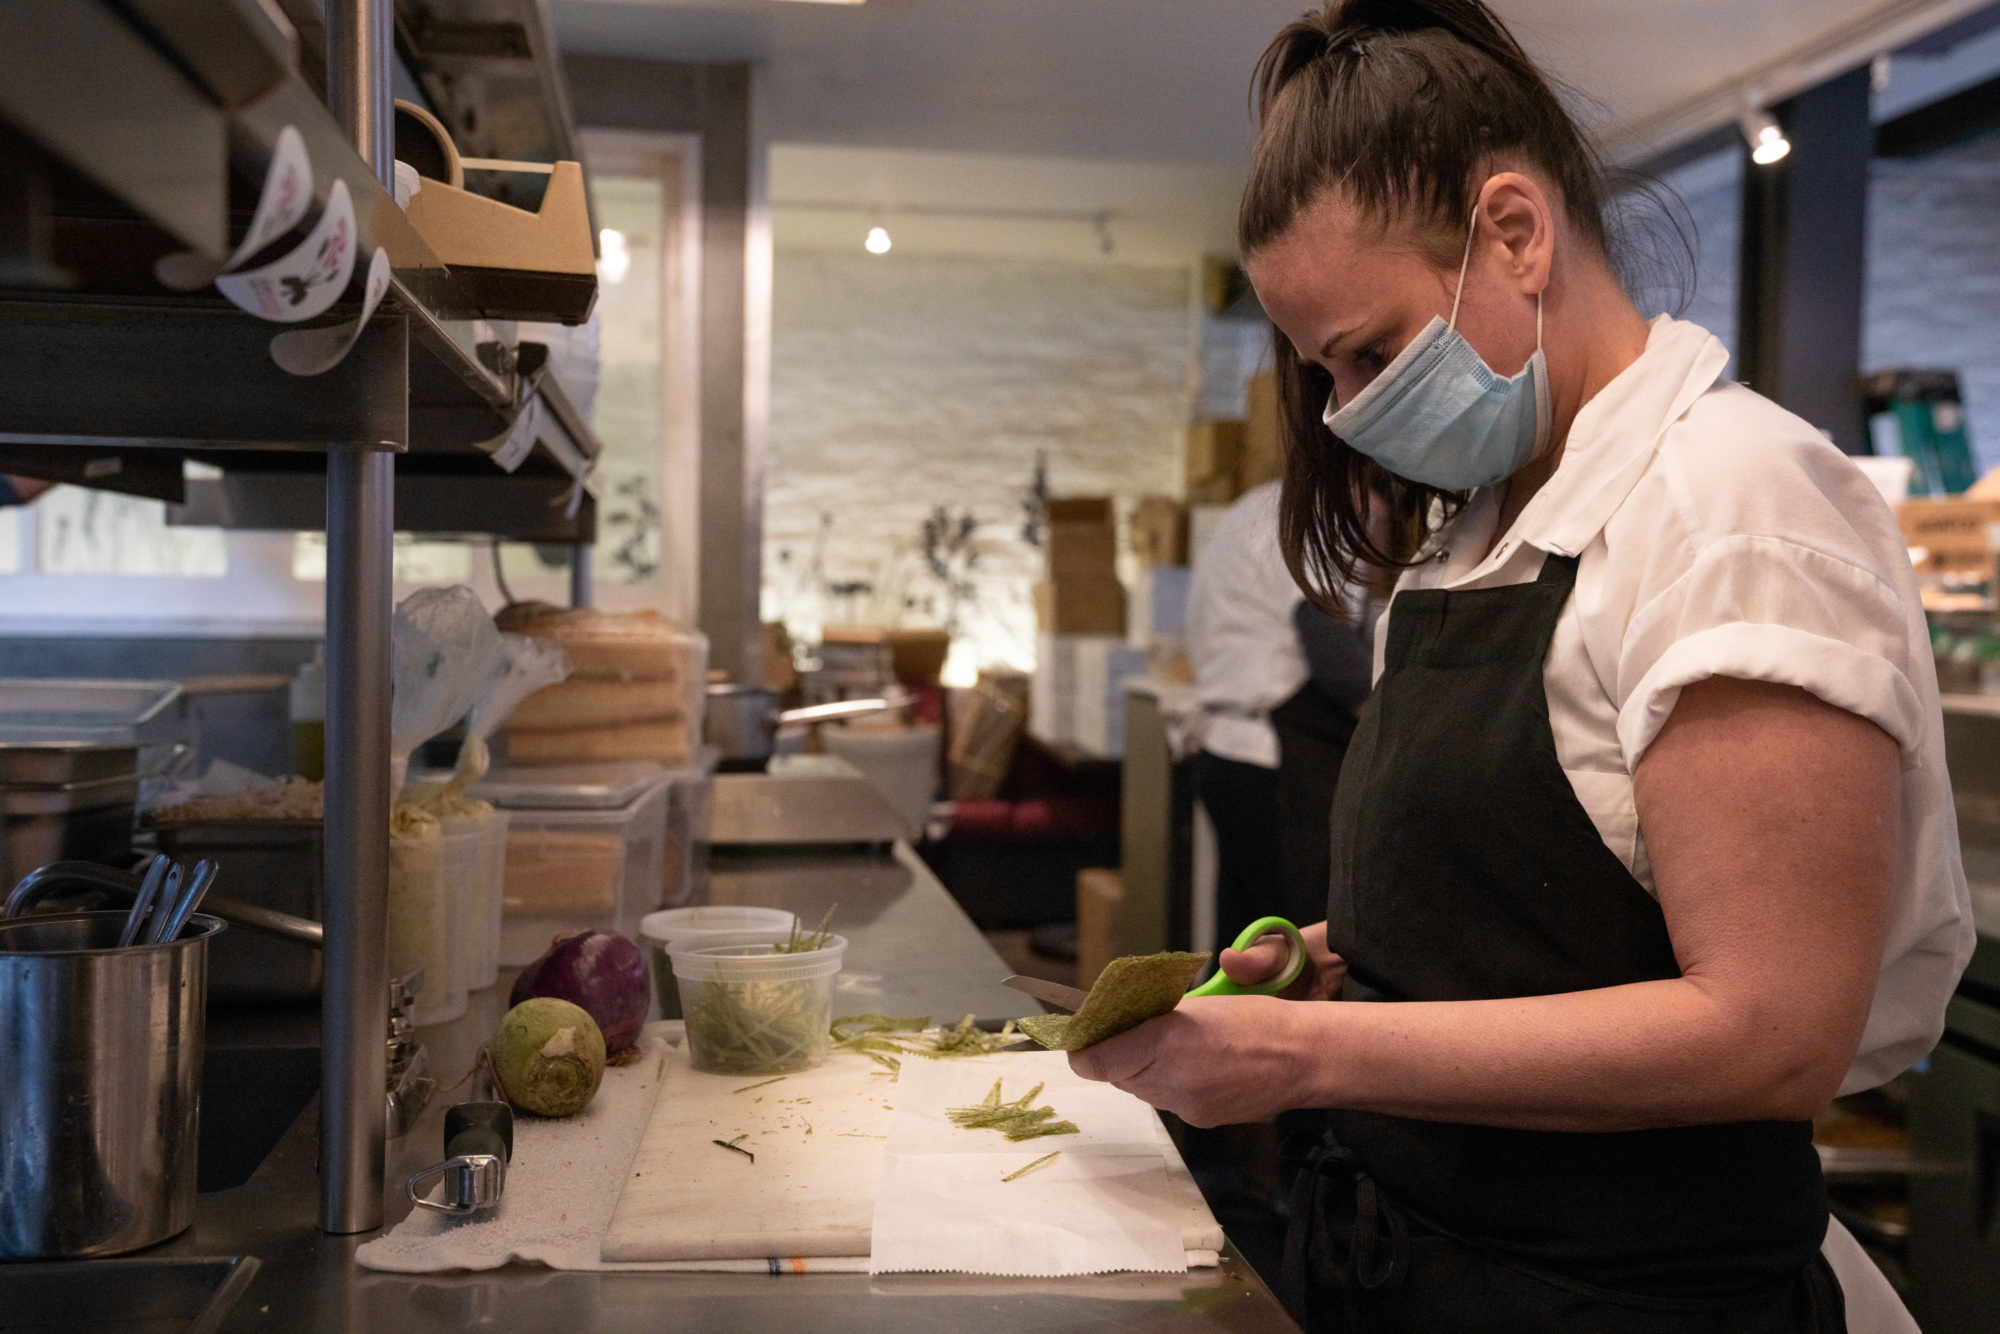 Cohen works in the restaurant's kitchen. // Photo by Mike Grippi for Resy